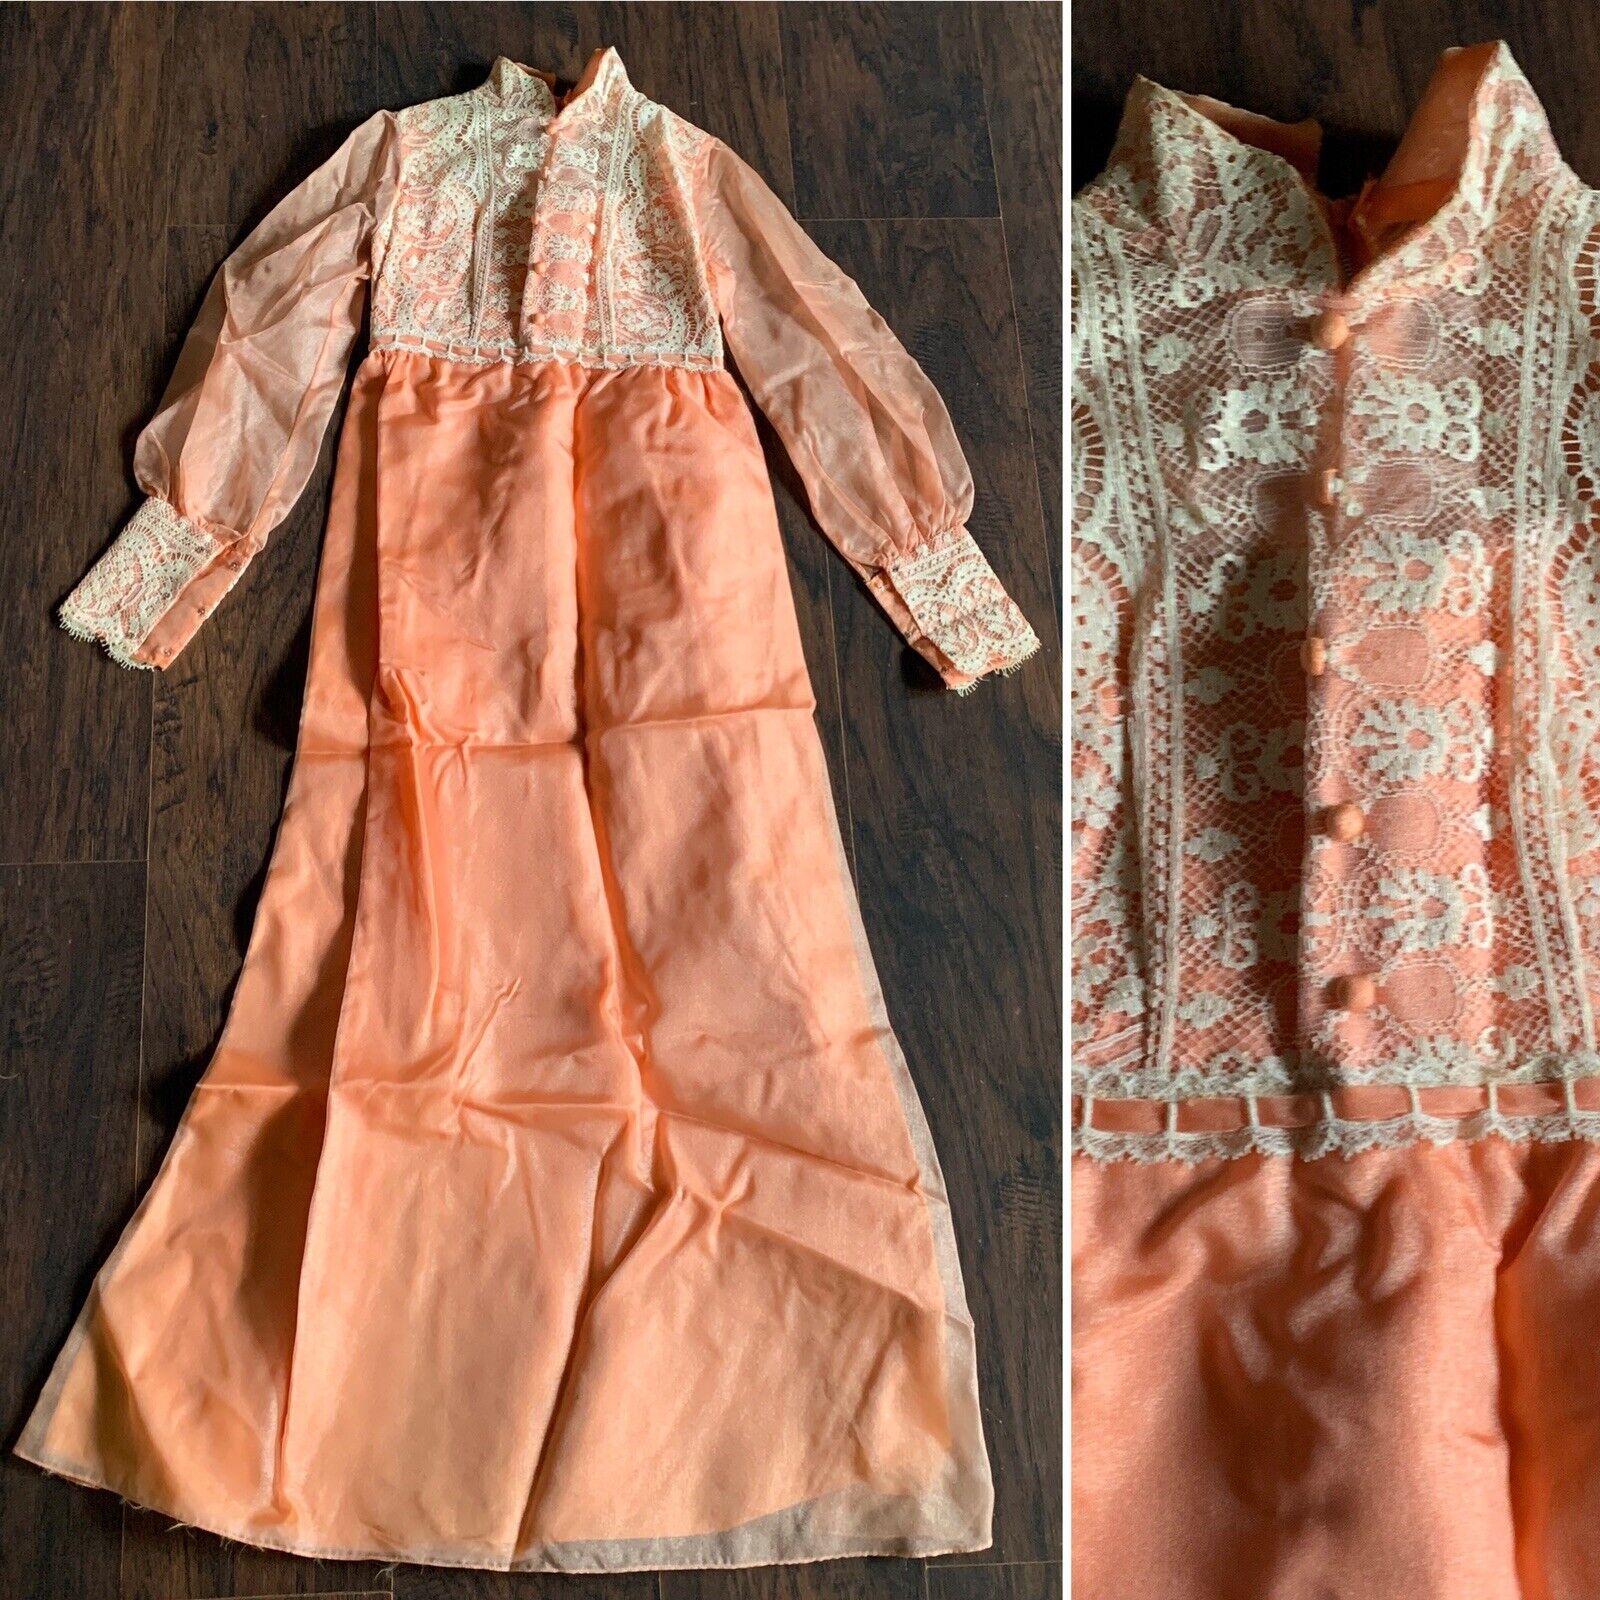 DRESS - Vtg 1970s Salmon/Peach Full-Length Rural Pioneer Gown, Fits Womens SMALL